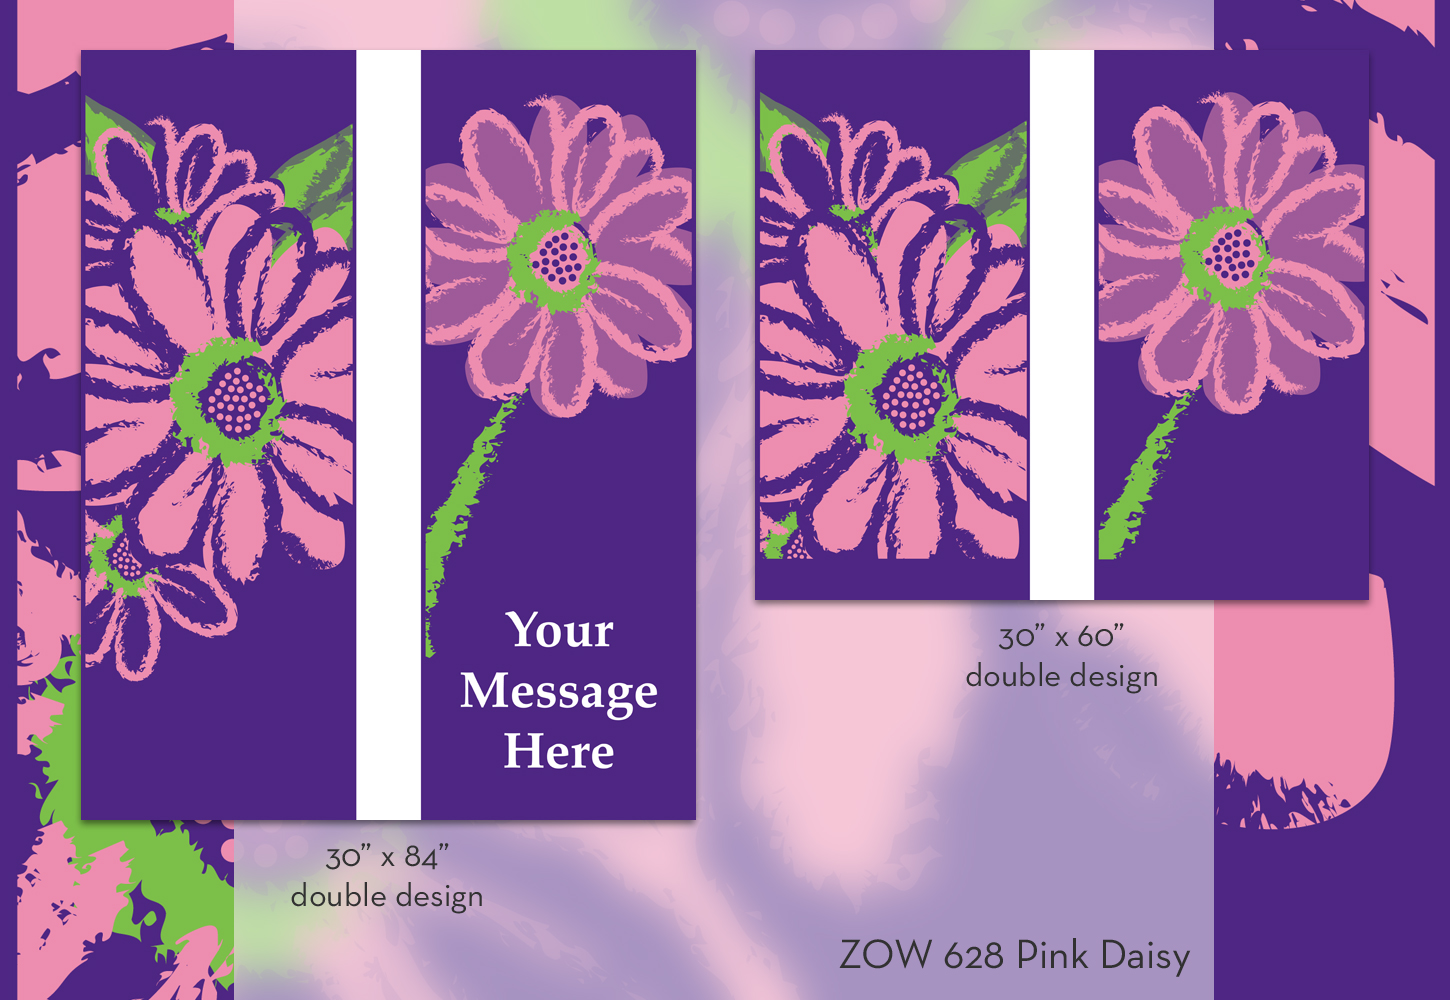 ZOW 628 Pink Daisy